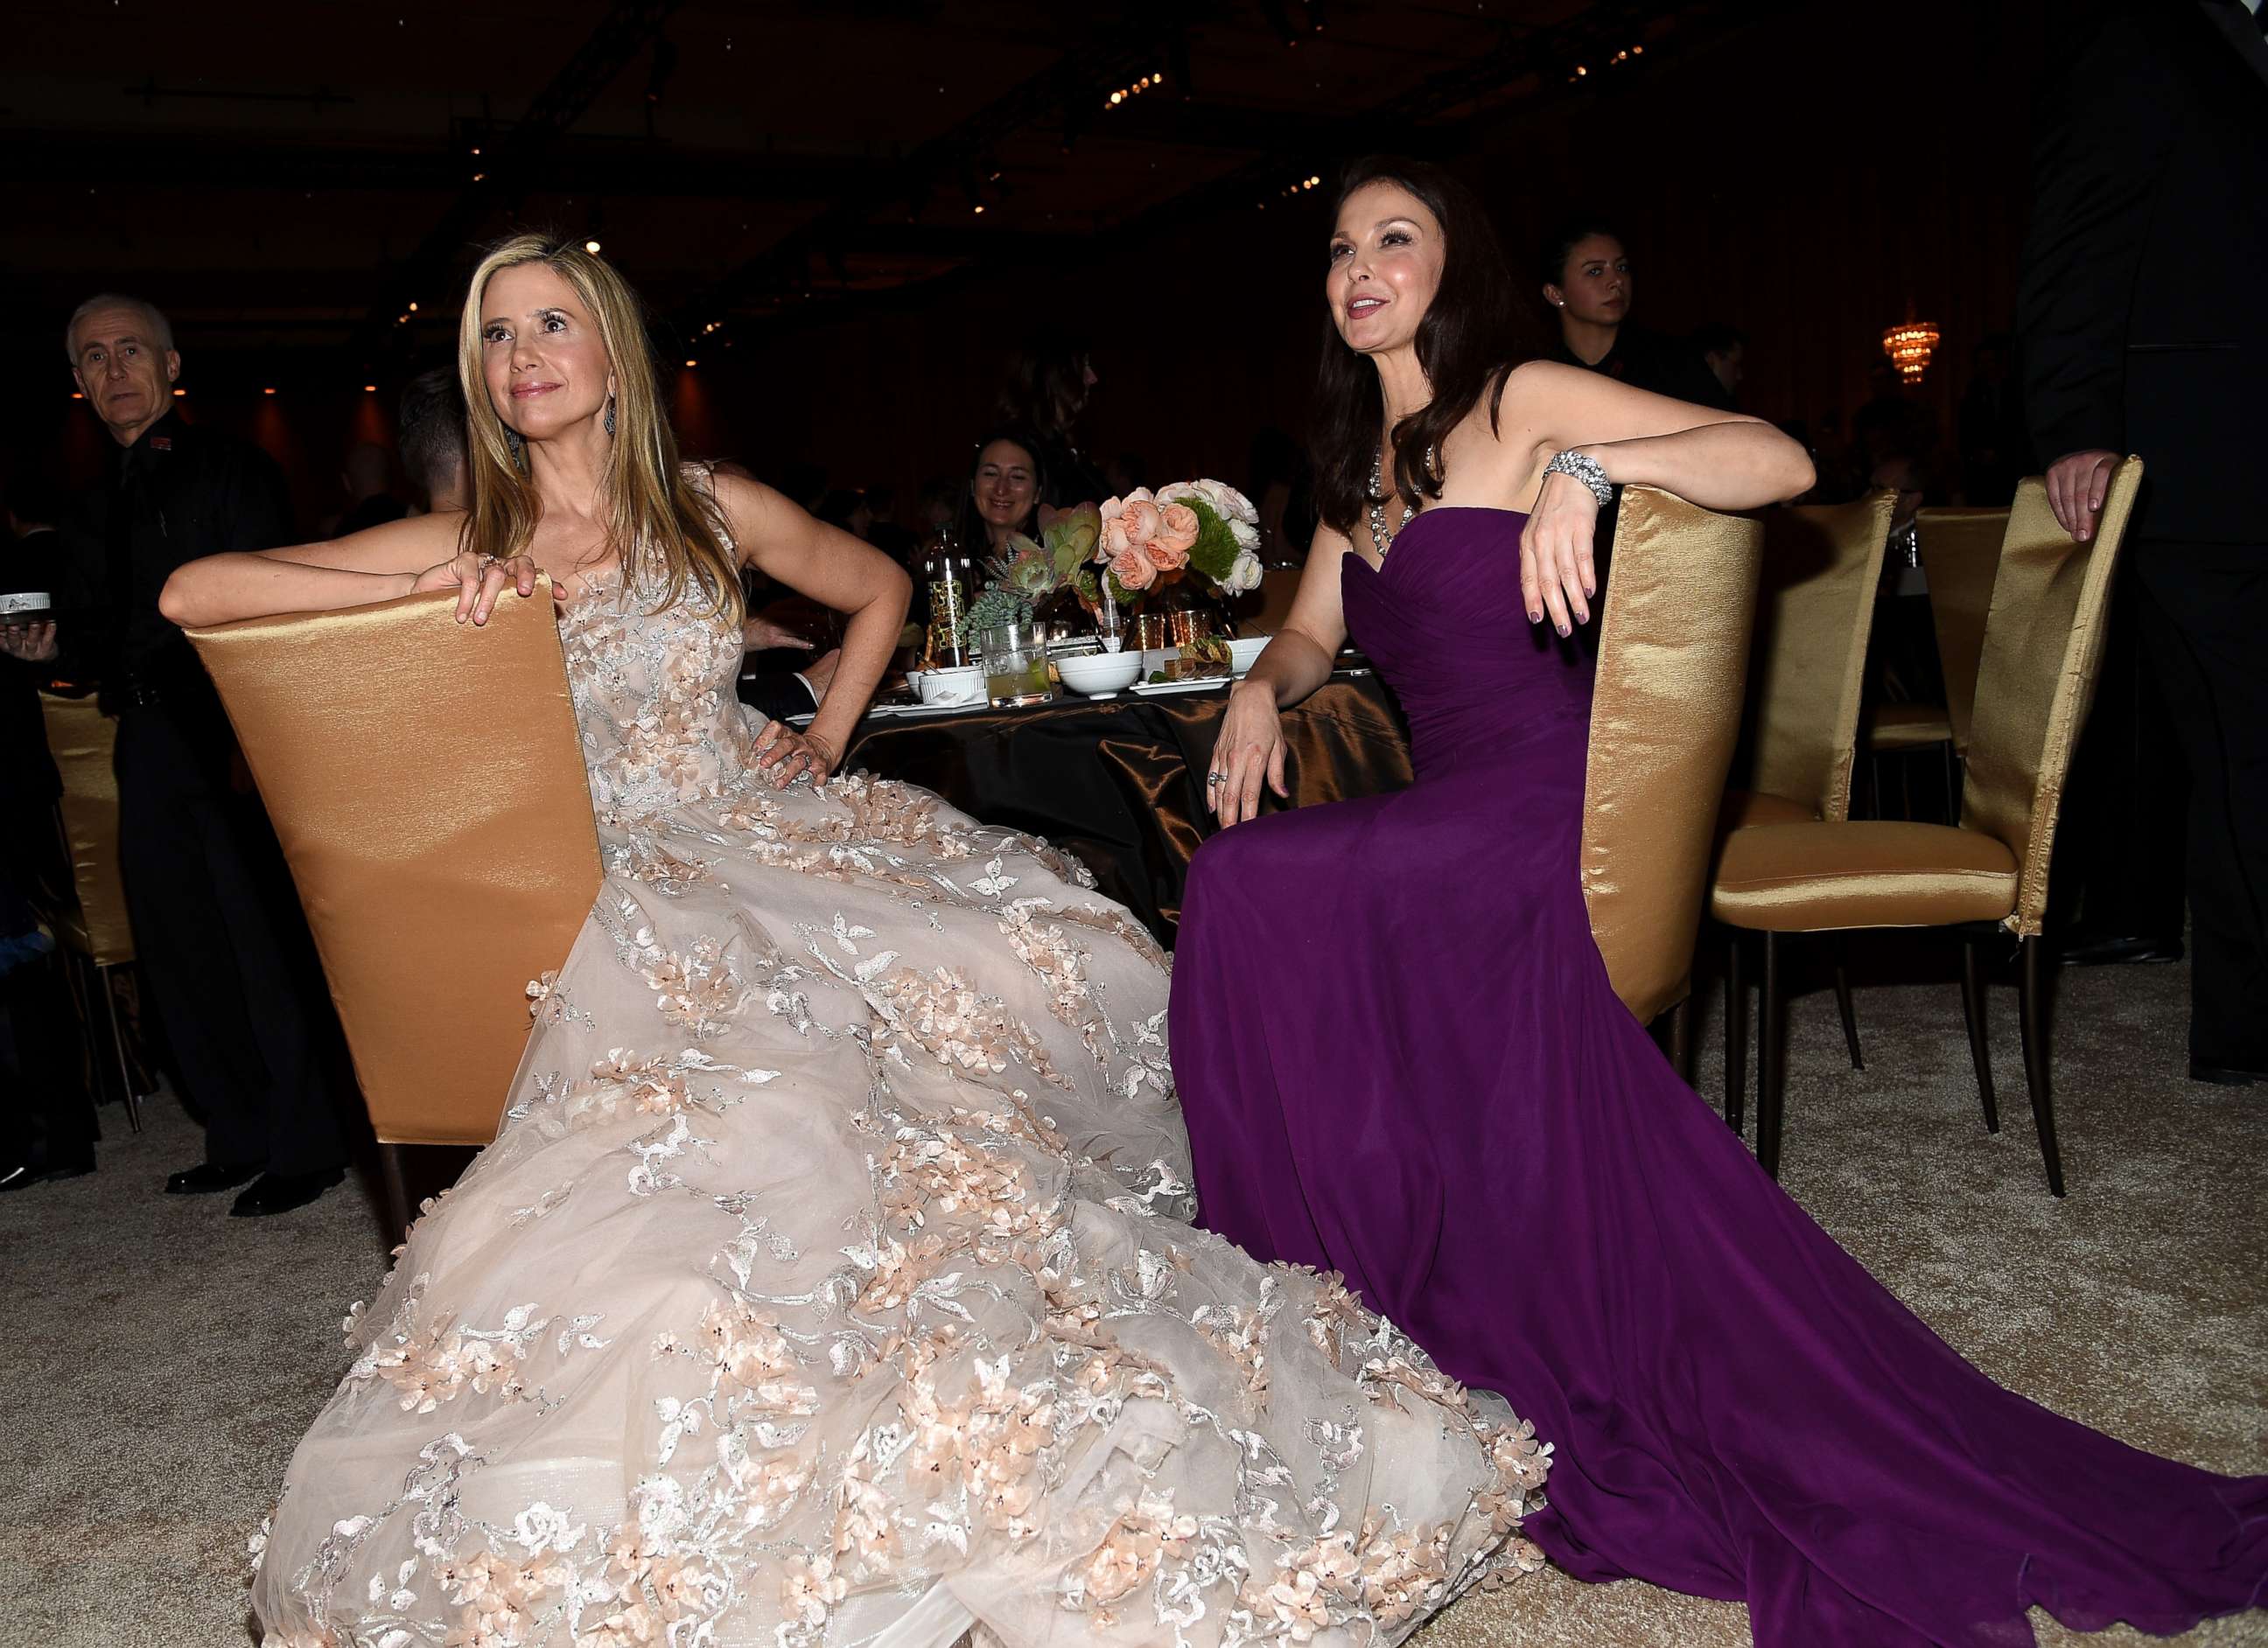 PHOTO: Mira Sorvino and Ashley Judd attend the 90th Annual Academy Awards Governors Ball at Hollywood & Highland Center, March 4, 2018, in Hollywood, Calif.